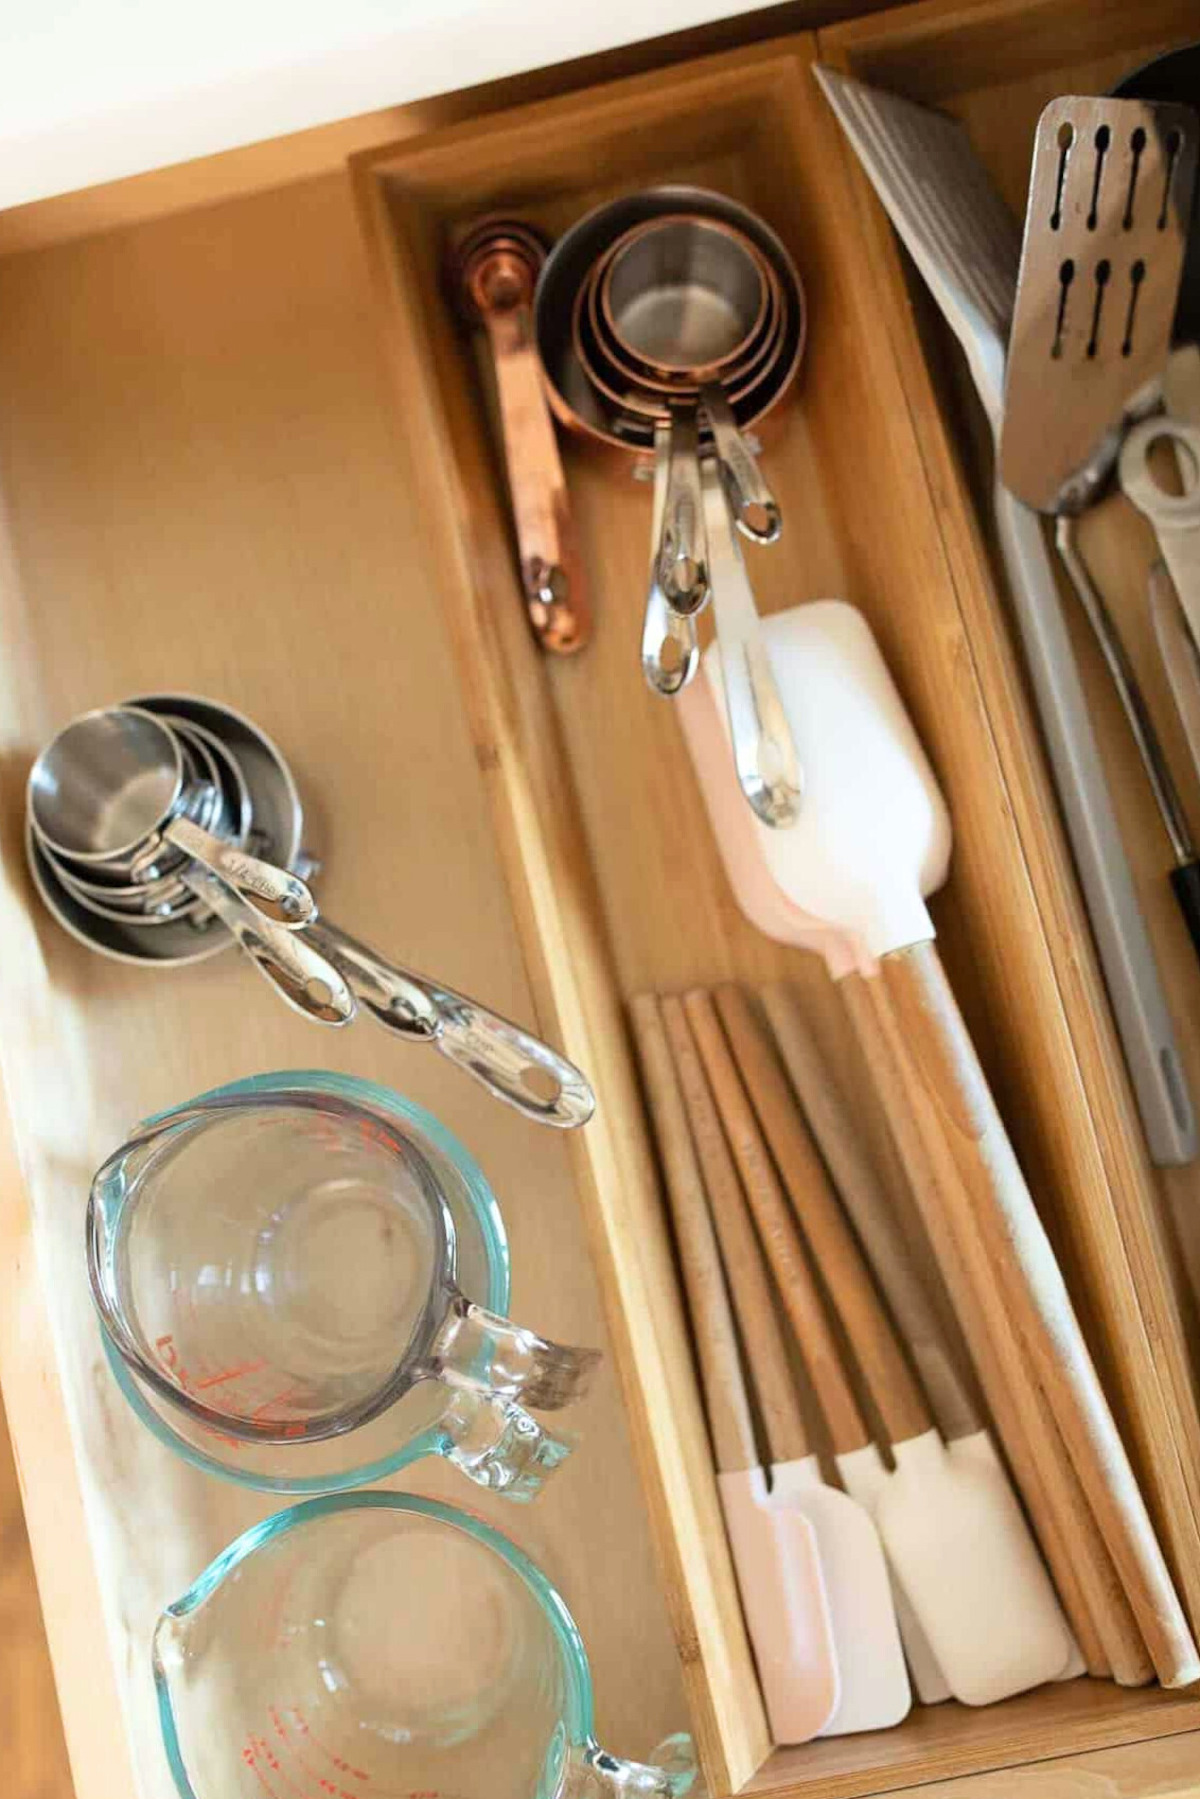 A drawer full of kitchen utensils and silverware drawer organizers.